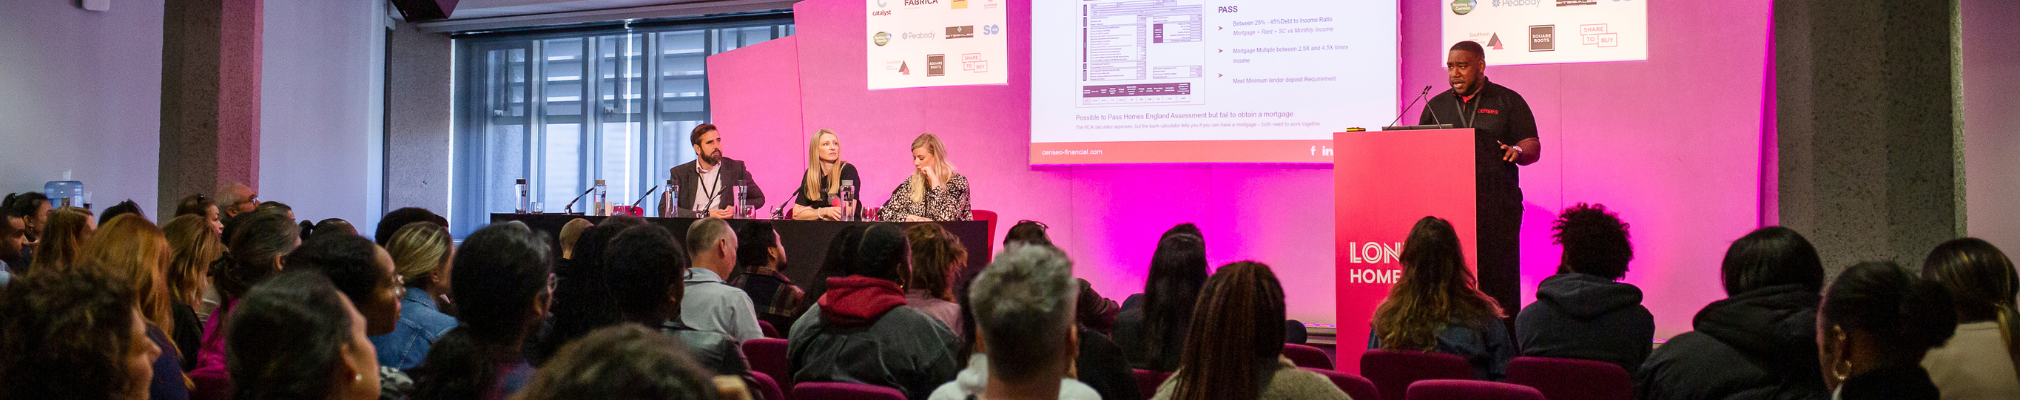 Why you should attend the London Home Show - attend live sessions!